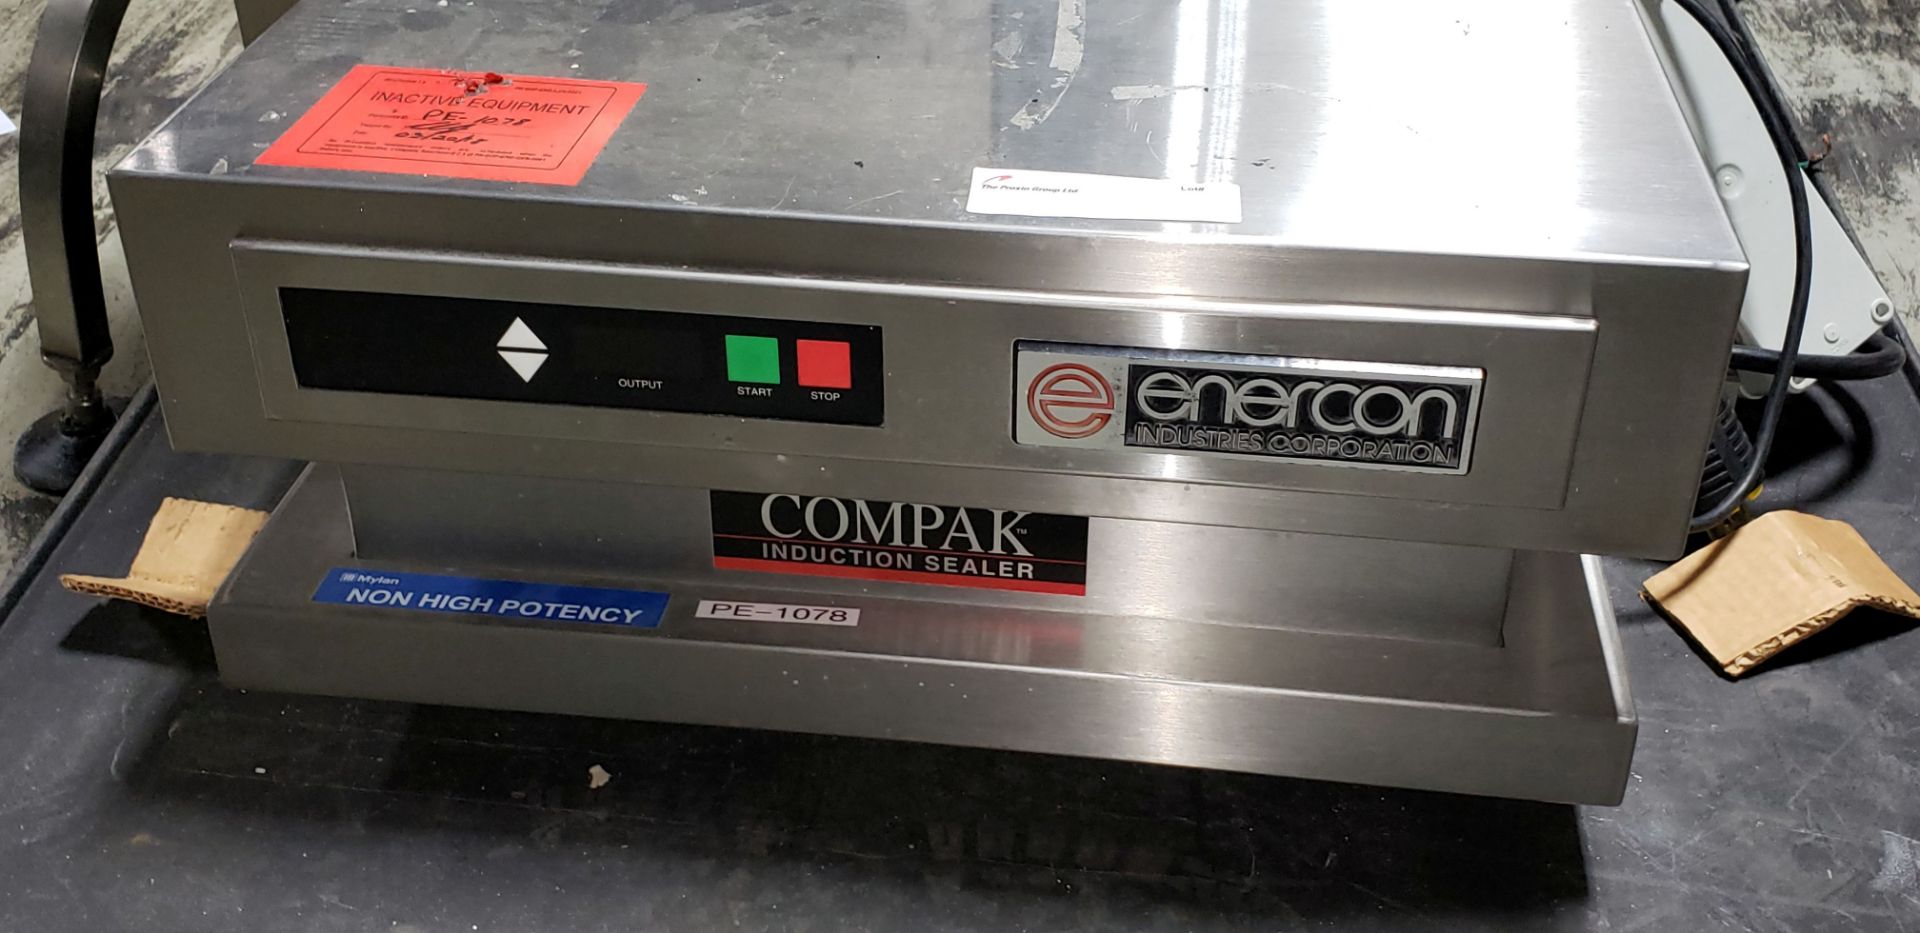 Enercon induction sealer, model Compak, with water system - Image 2 of 7